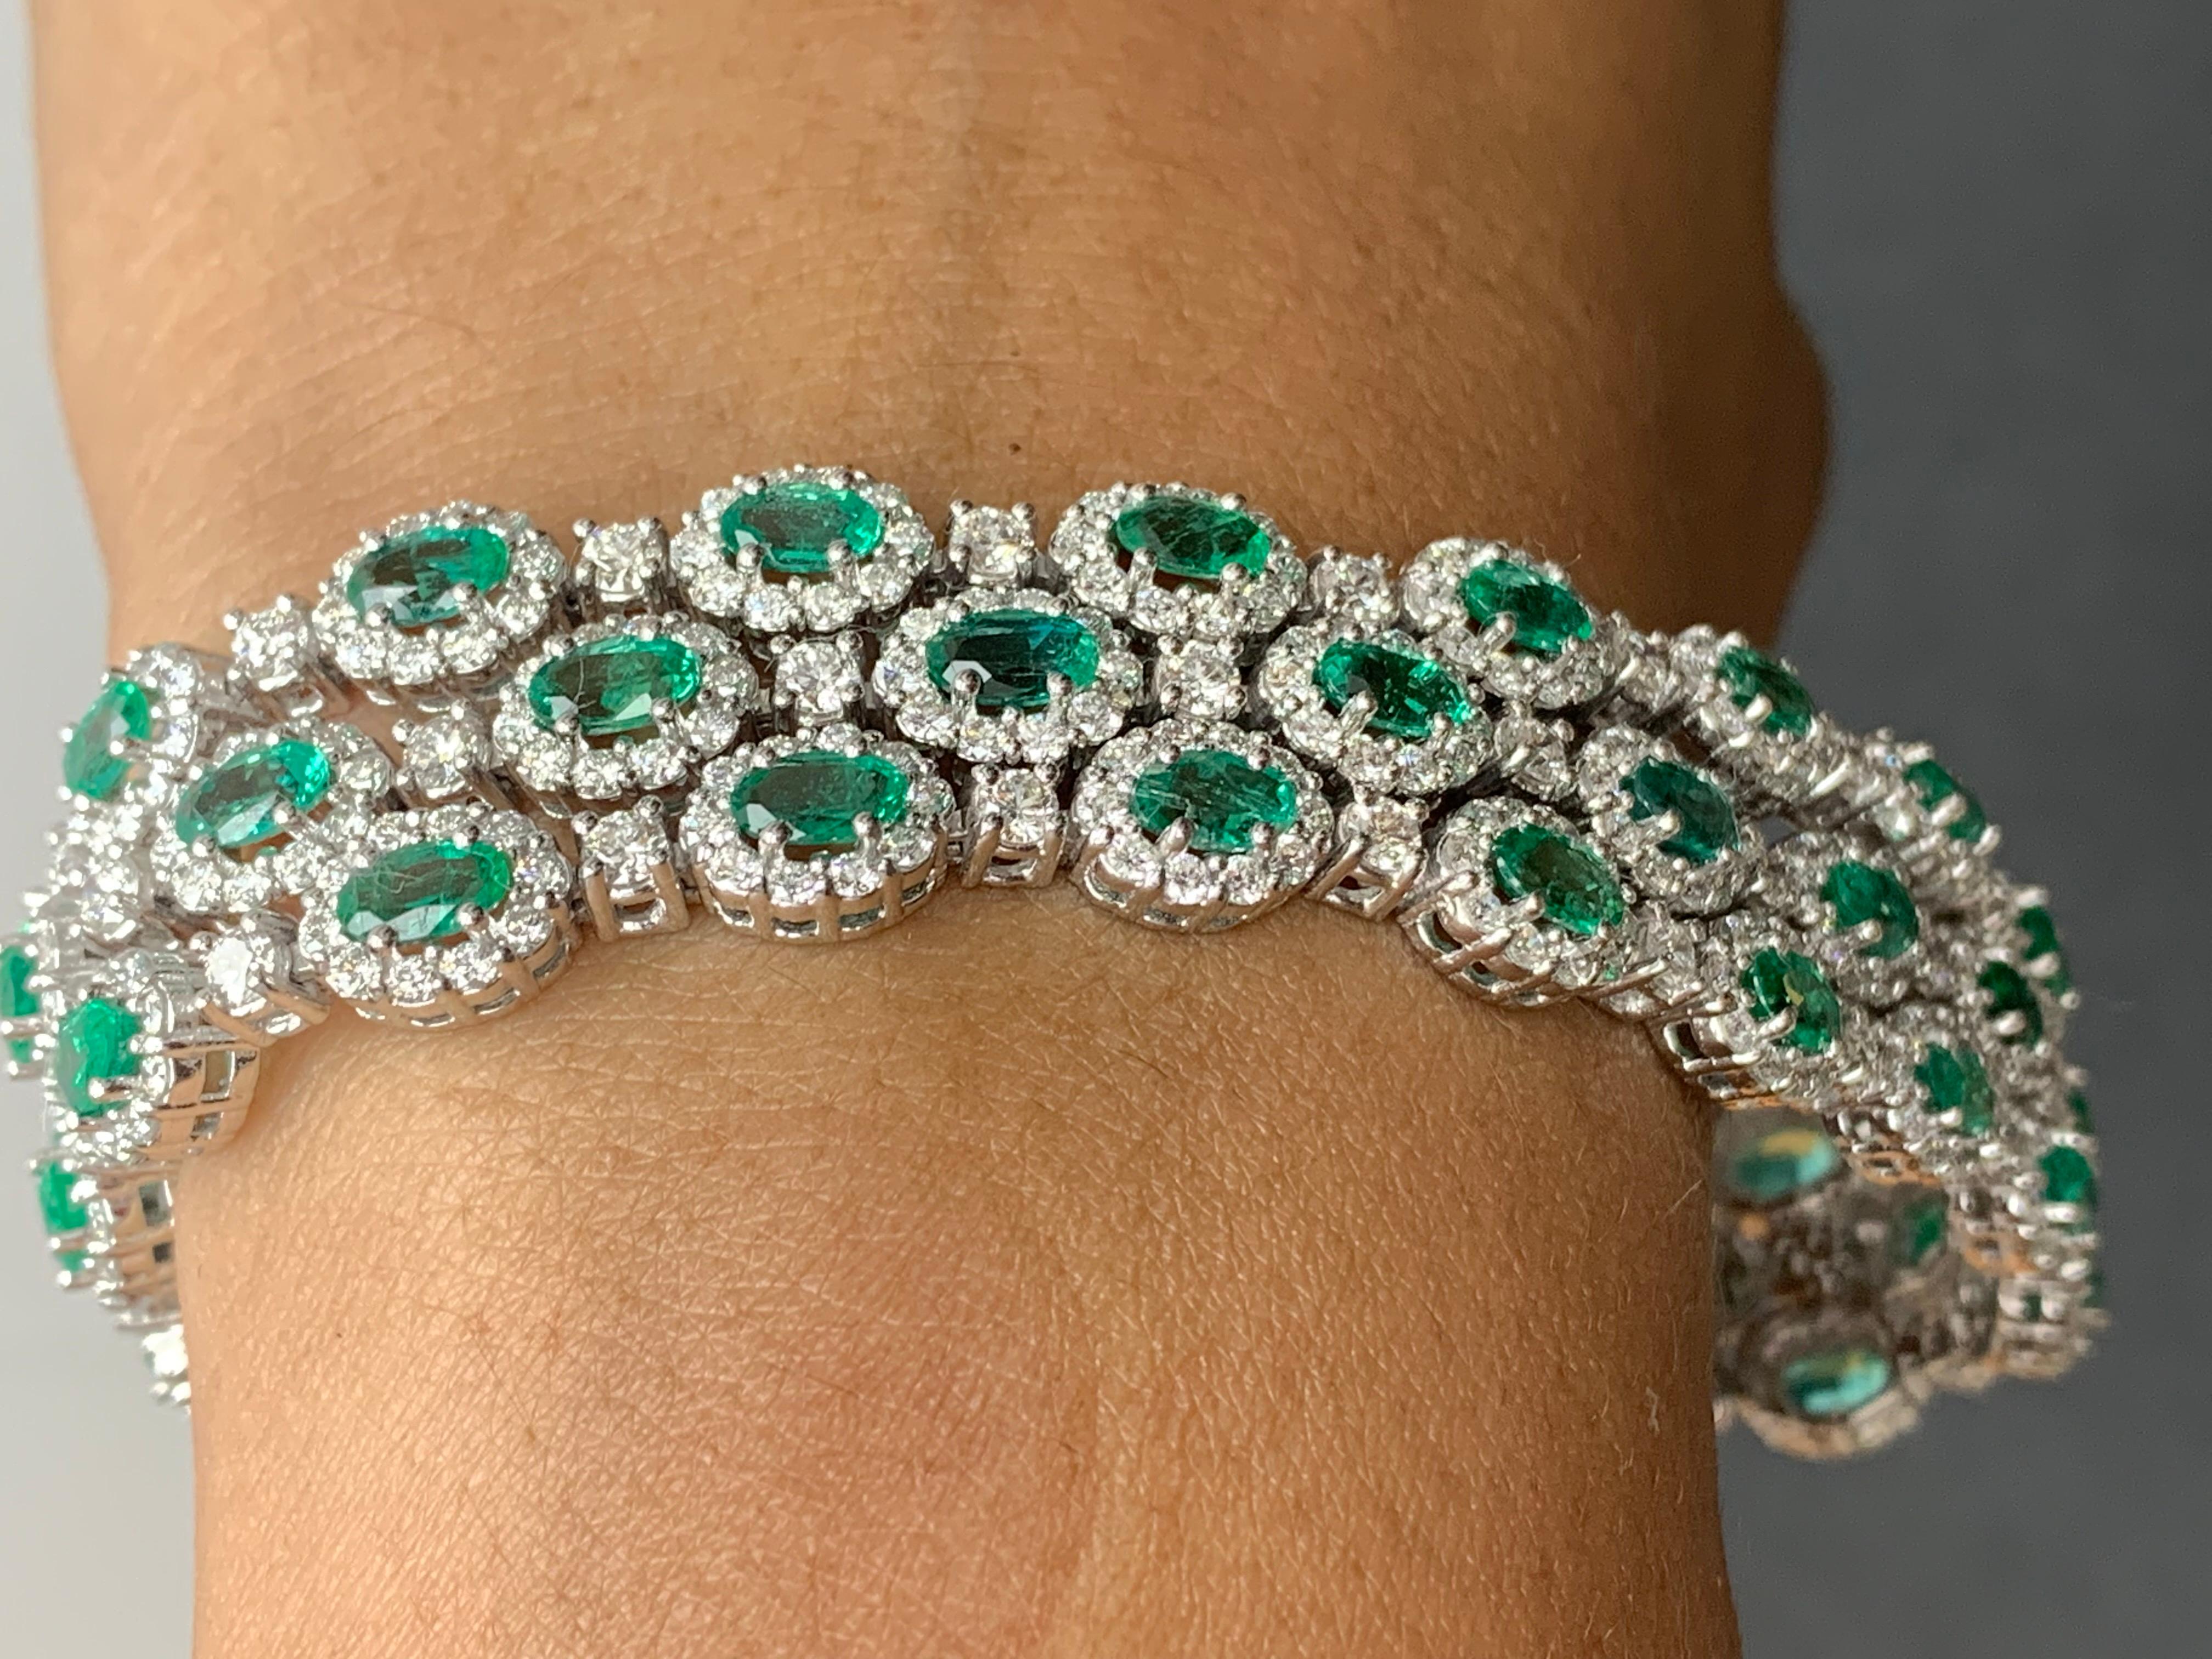 Modern 10.95 Carat Oval Cut Emerald and Diamond 3 Row Bracelet in 14K White Gold For Sale